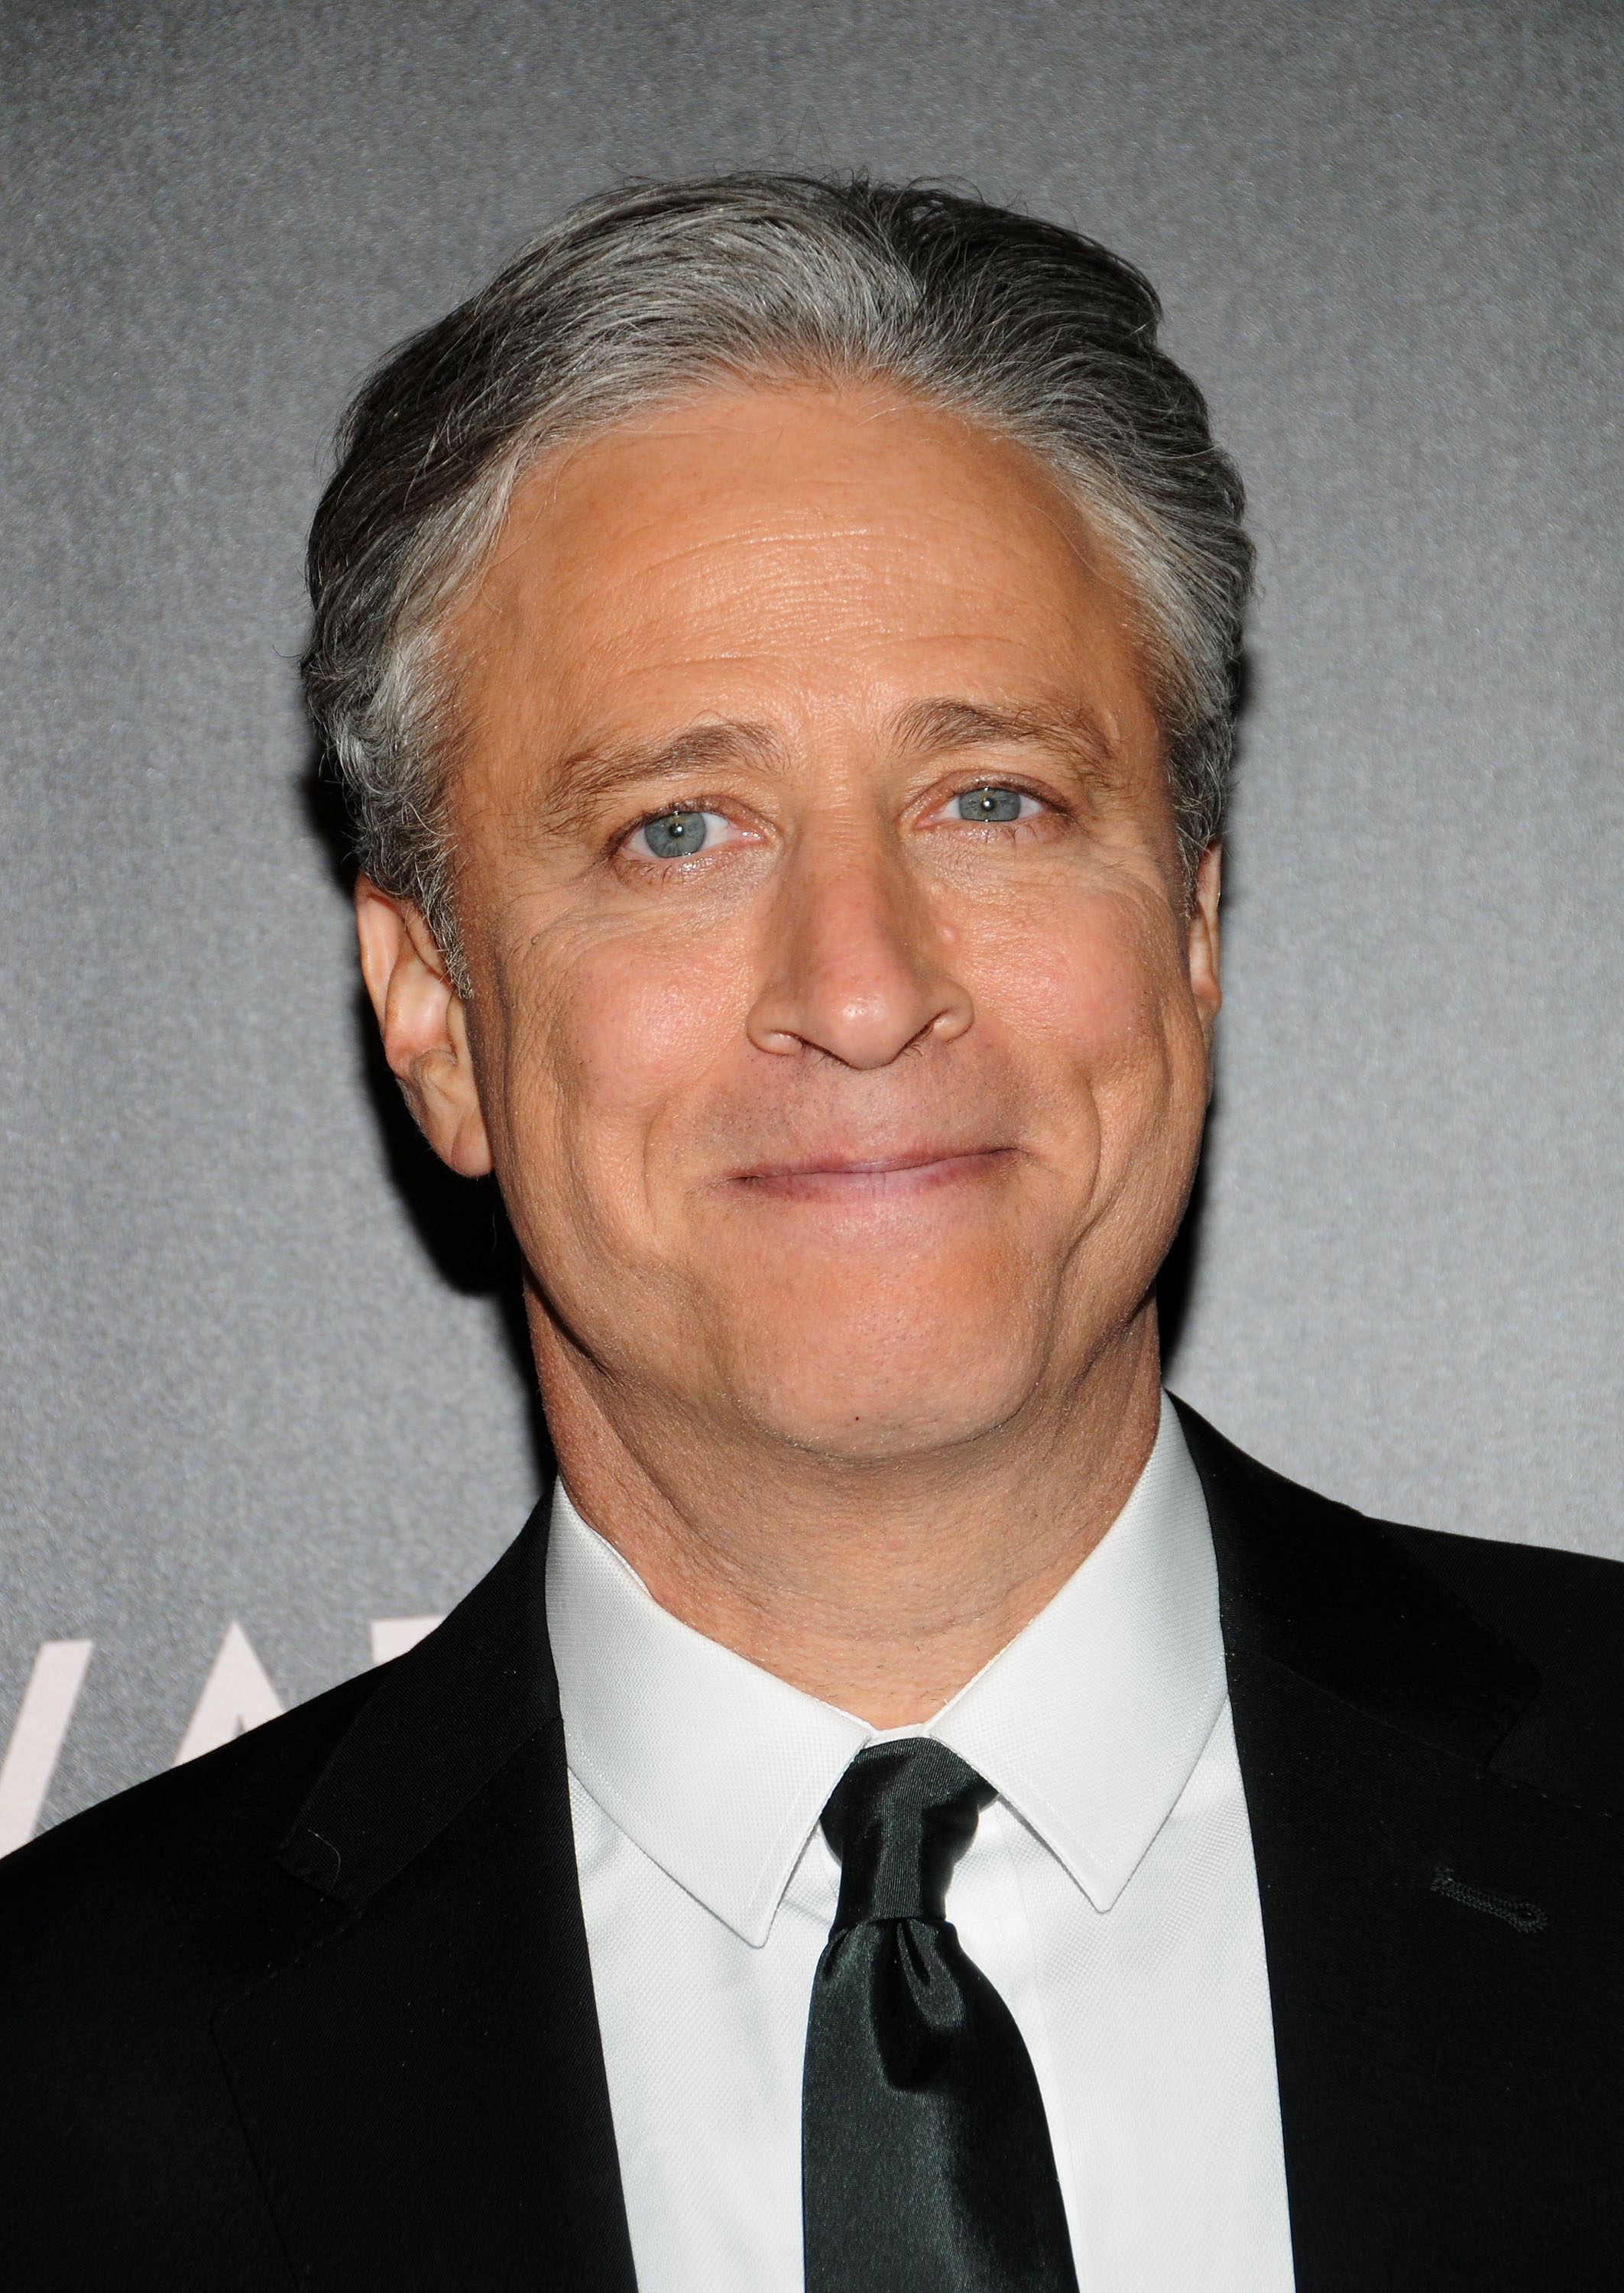 Director-writer-producer Jon Stewart attends the New York premiere of his movie <i>Rosewater</i> at AMC Lincoln Square Theater in New York City on Nov. 12, 2014 (Desiree Navarro—WireImage/Getty Images)